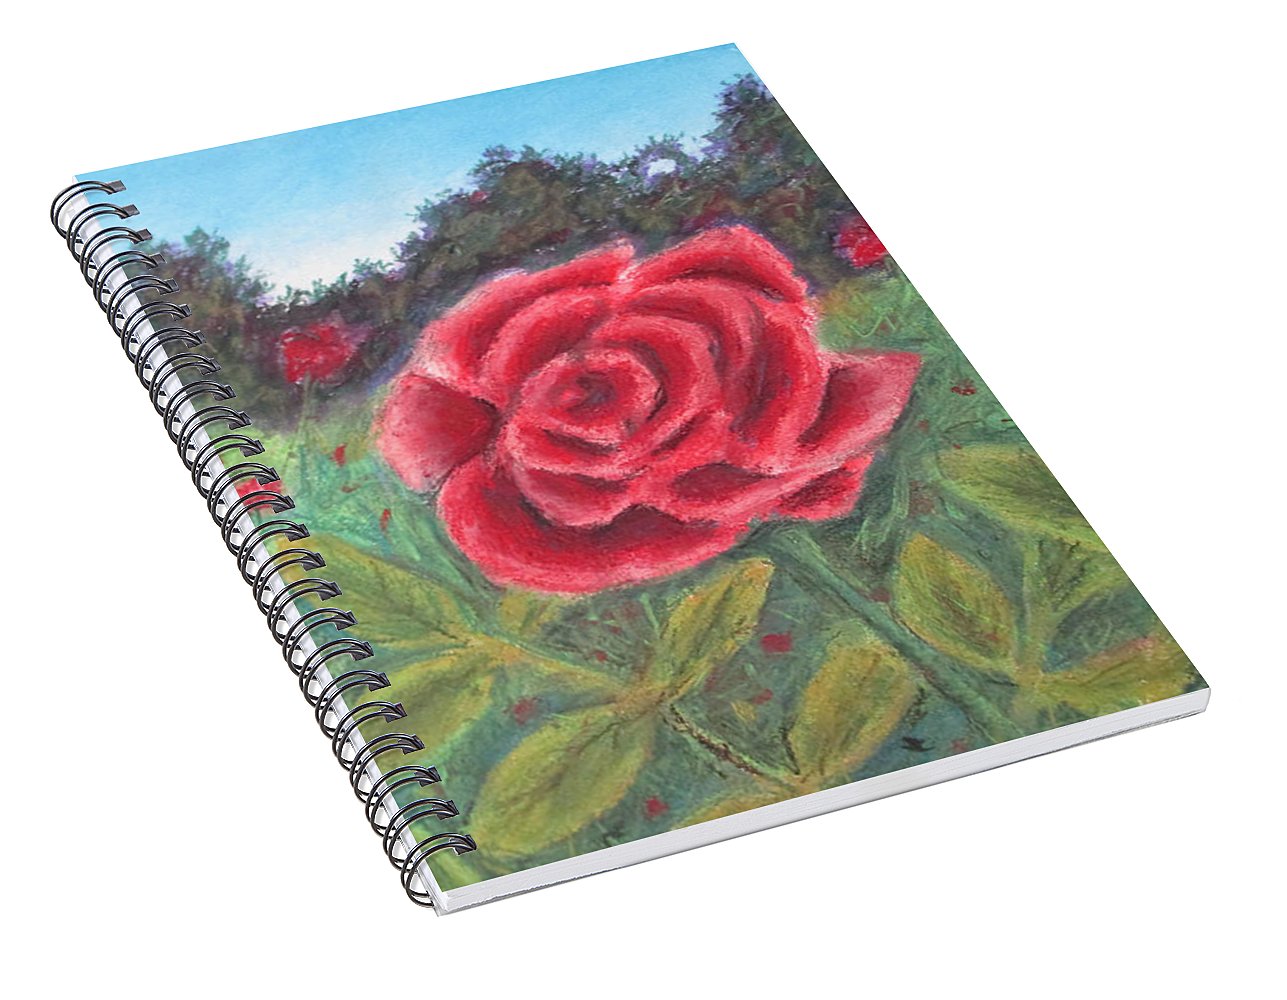 Field of Roses - Spiral Notebook